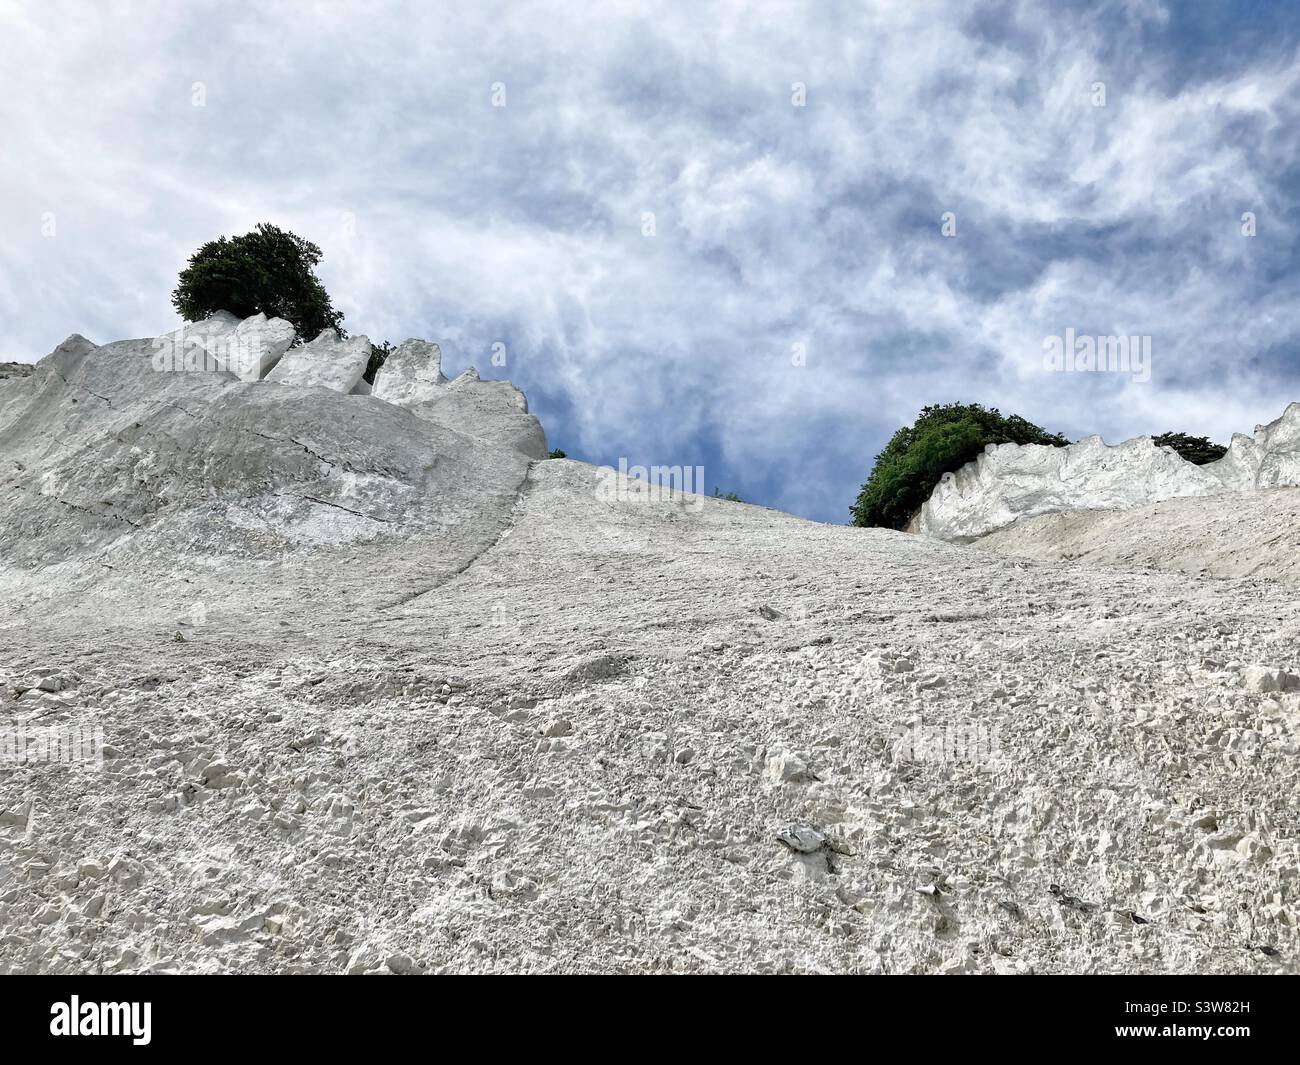 The White chalk cliffs of Mons Cliff Pictured from below Stock Photo